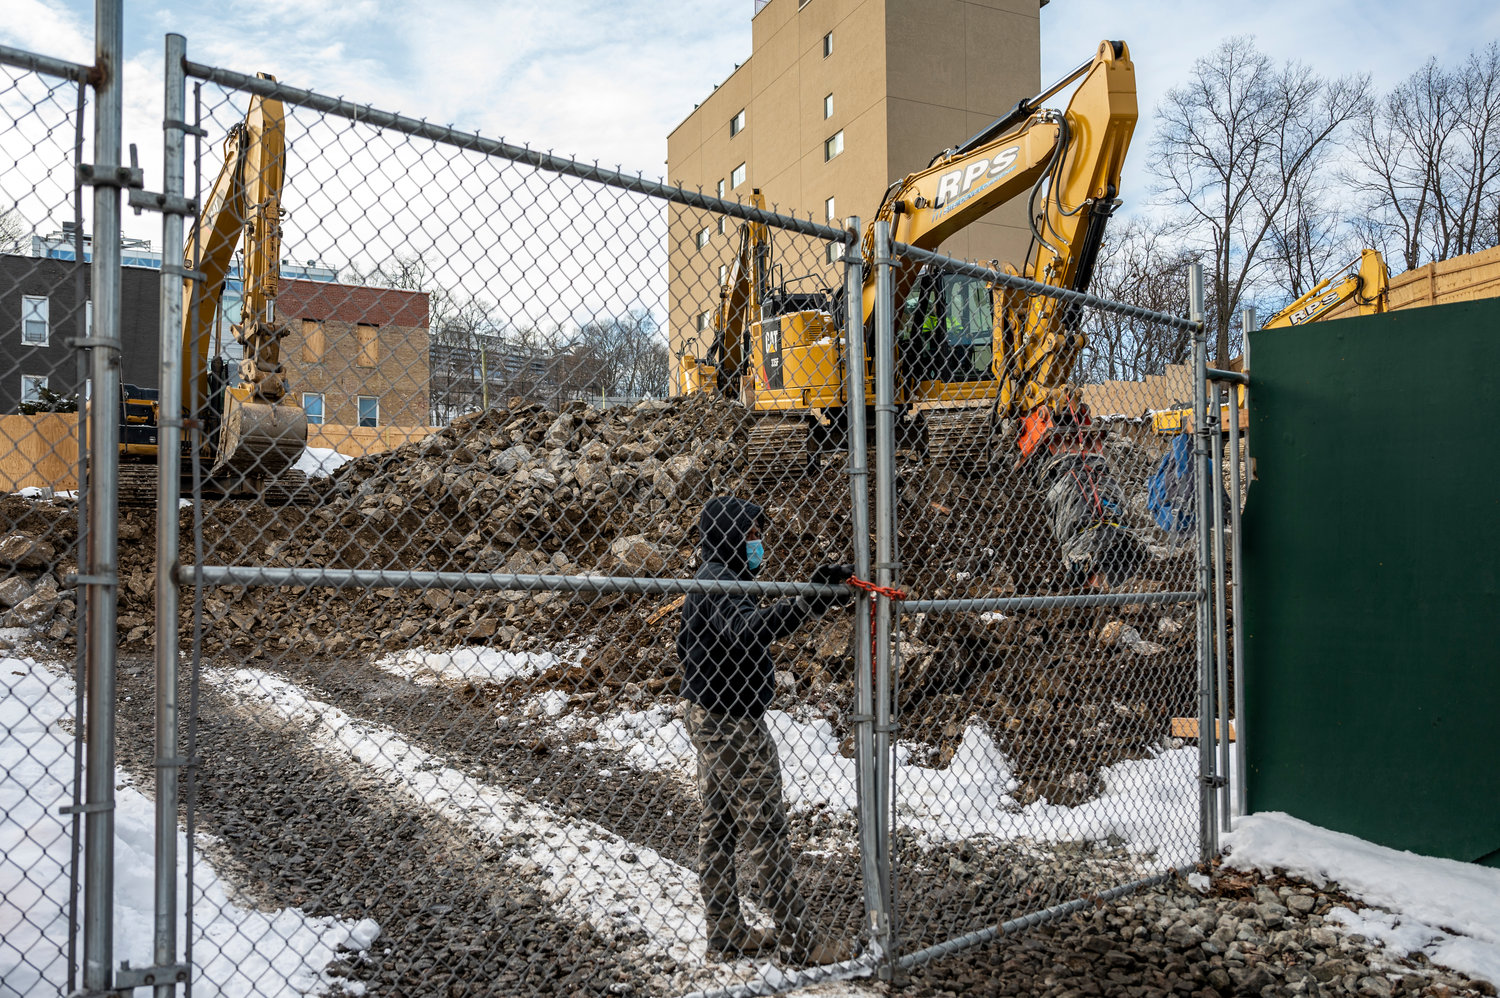 Rock chipping is expected to continue for some weeks at 5278 Post Road, where Stagg Group is erecting a seven-story residential building. Yet, for the most part, neighbors have offered few complaints.